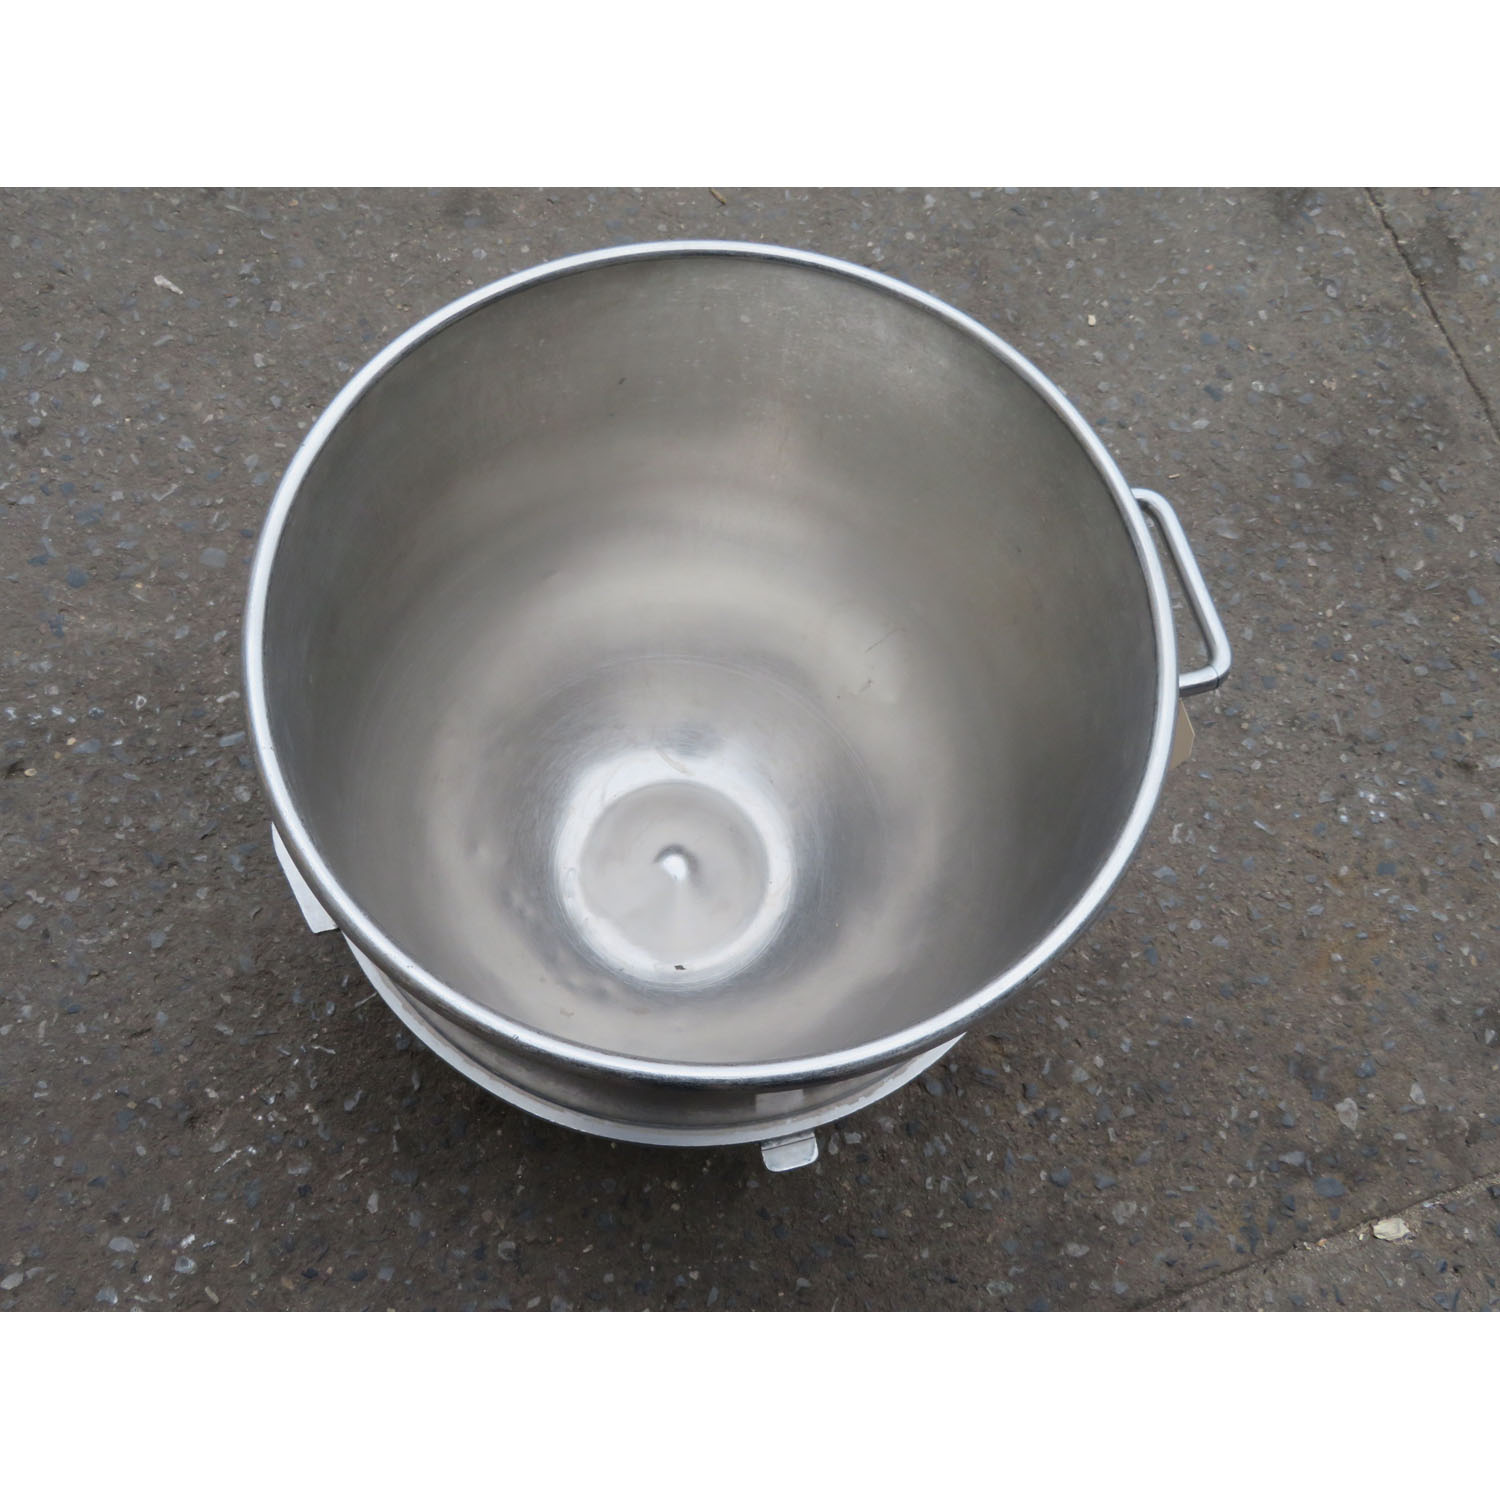 Hobart VMLHP40 40-Quart Bowl for 80 to 40 Bowl Adapter, Used Excellent Condition image 3